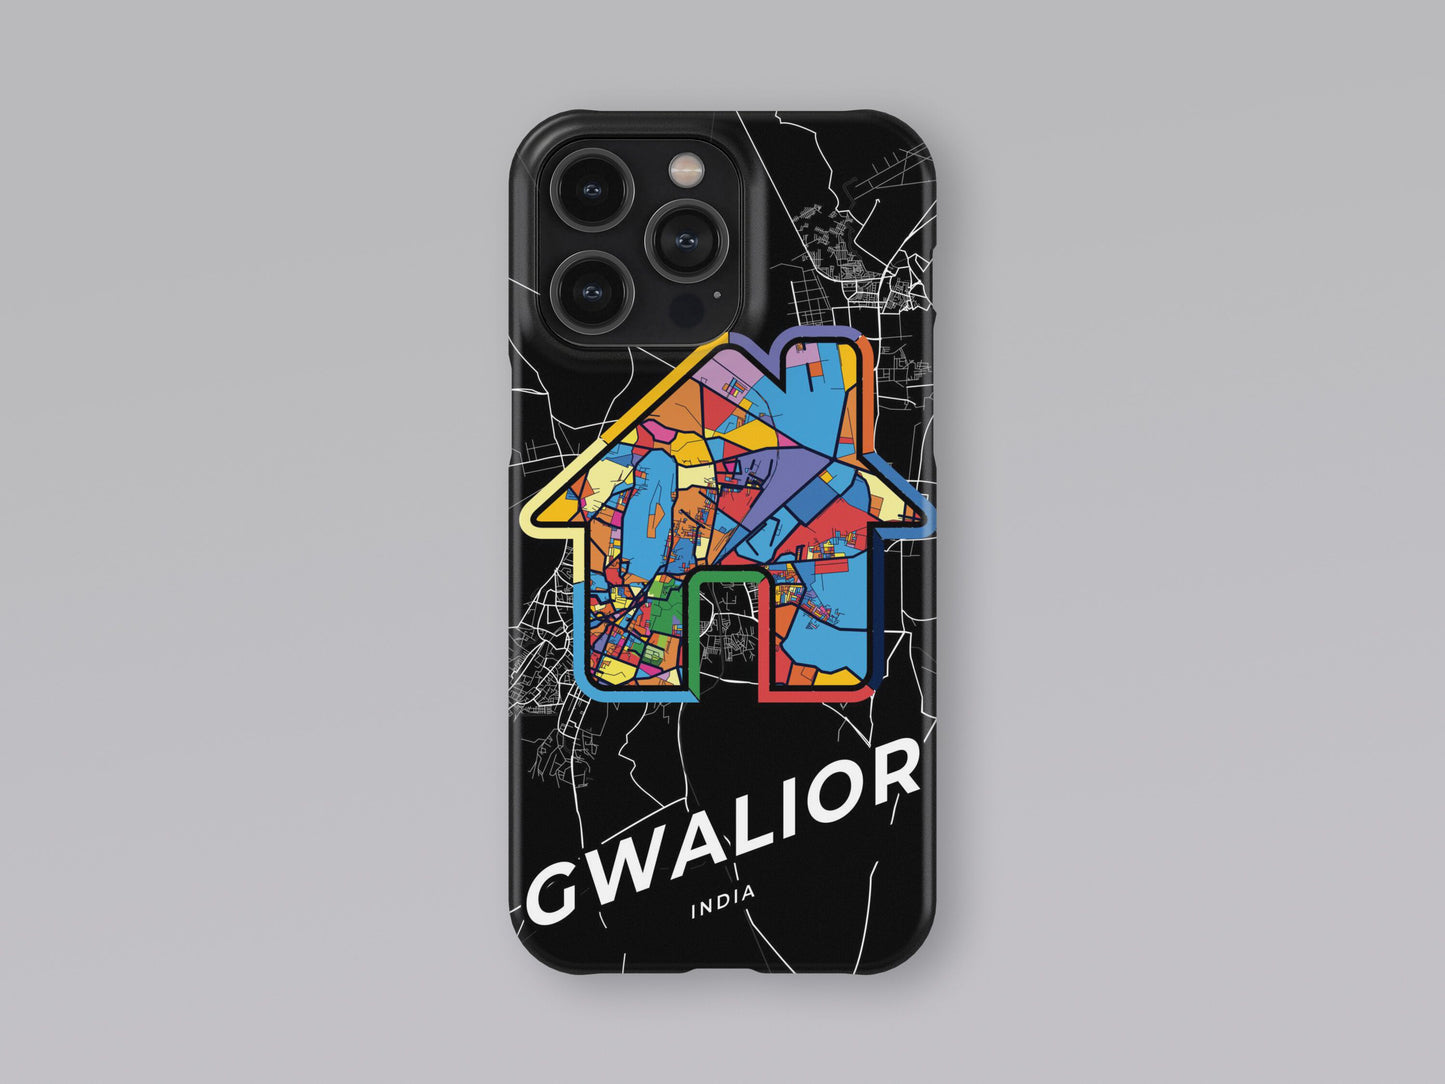 Gwalior India slim phone case with colorful icon. Birthday, wedding or housewarming gift. Couple match cases. 3